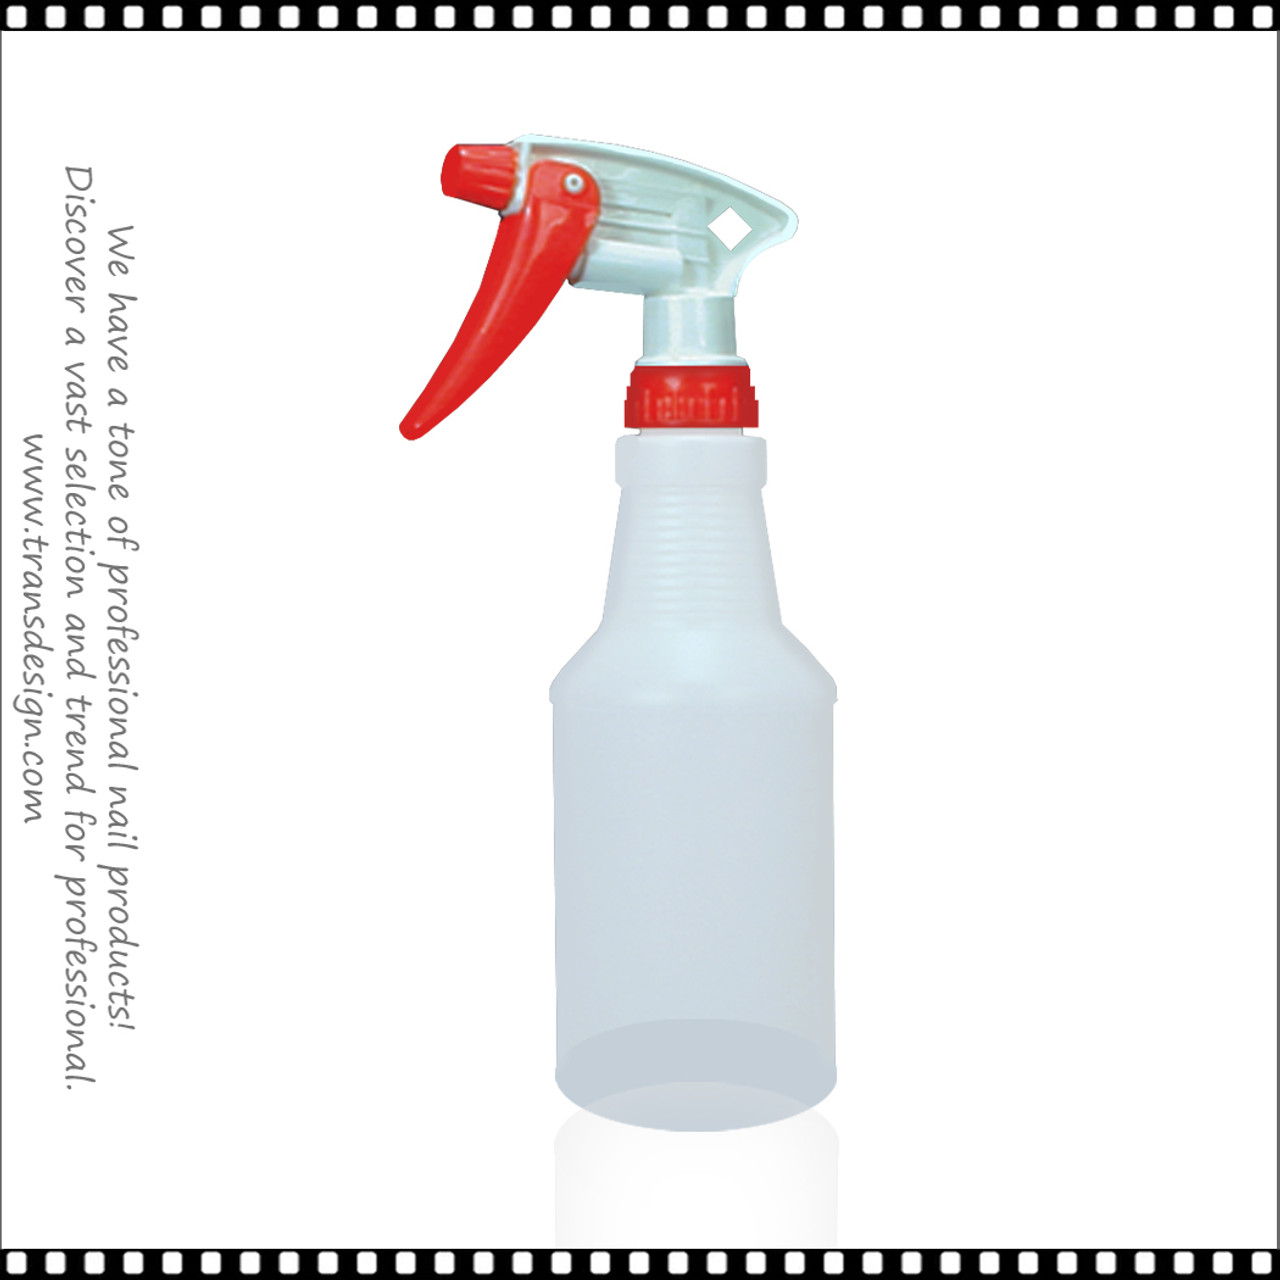 BOTTLE HDPE with Red Trigger Spray 16oz. - TDI, Inc